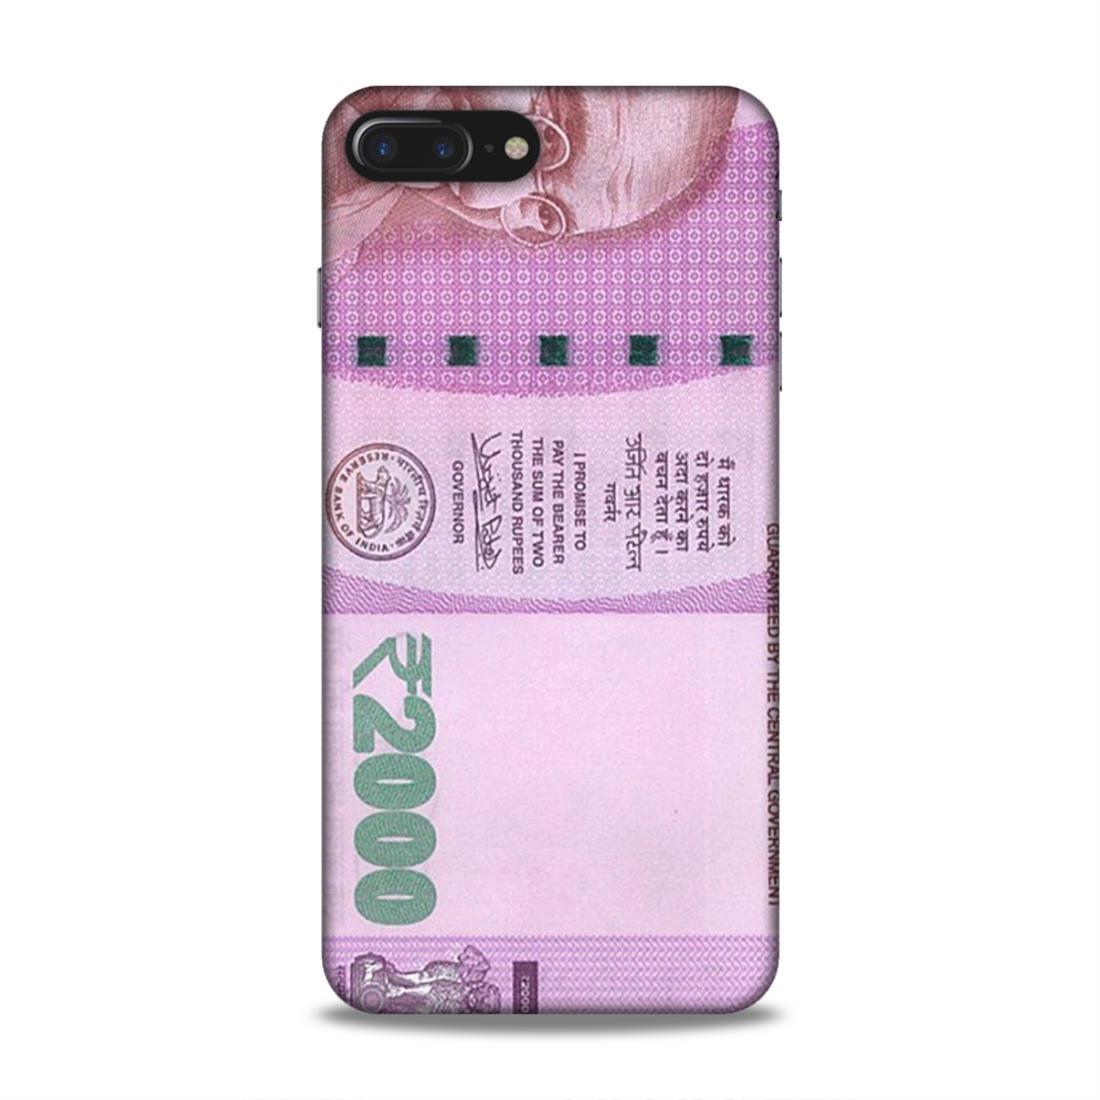 Rs 2000 Currency Note iPhone 7 Plus Phone Cover